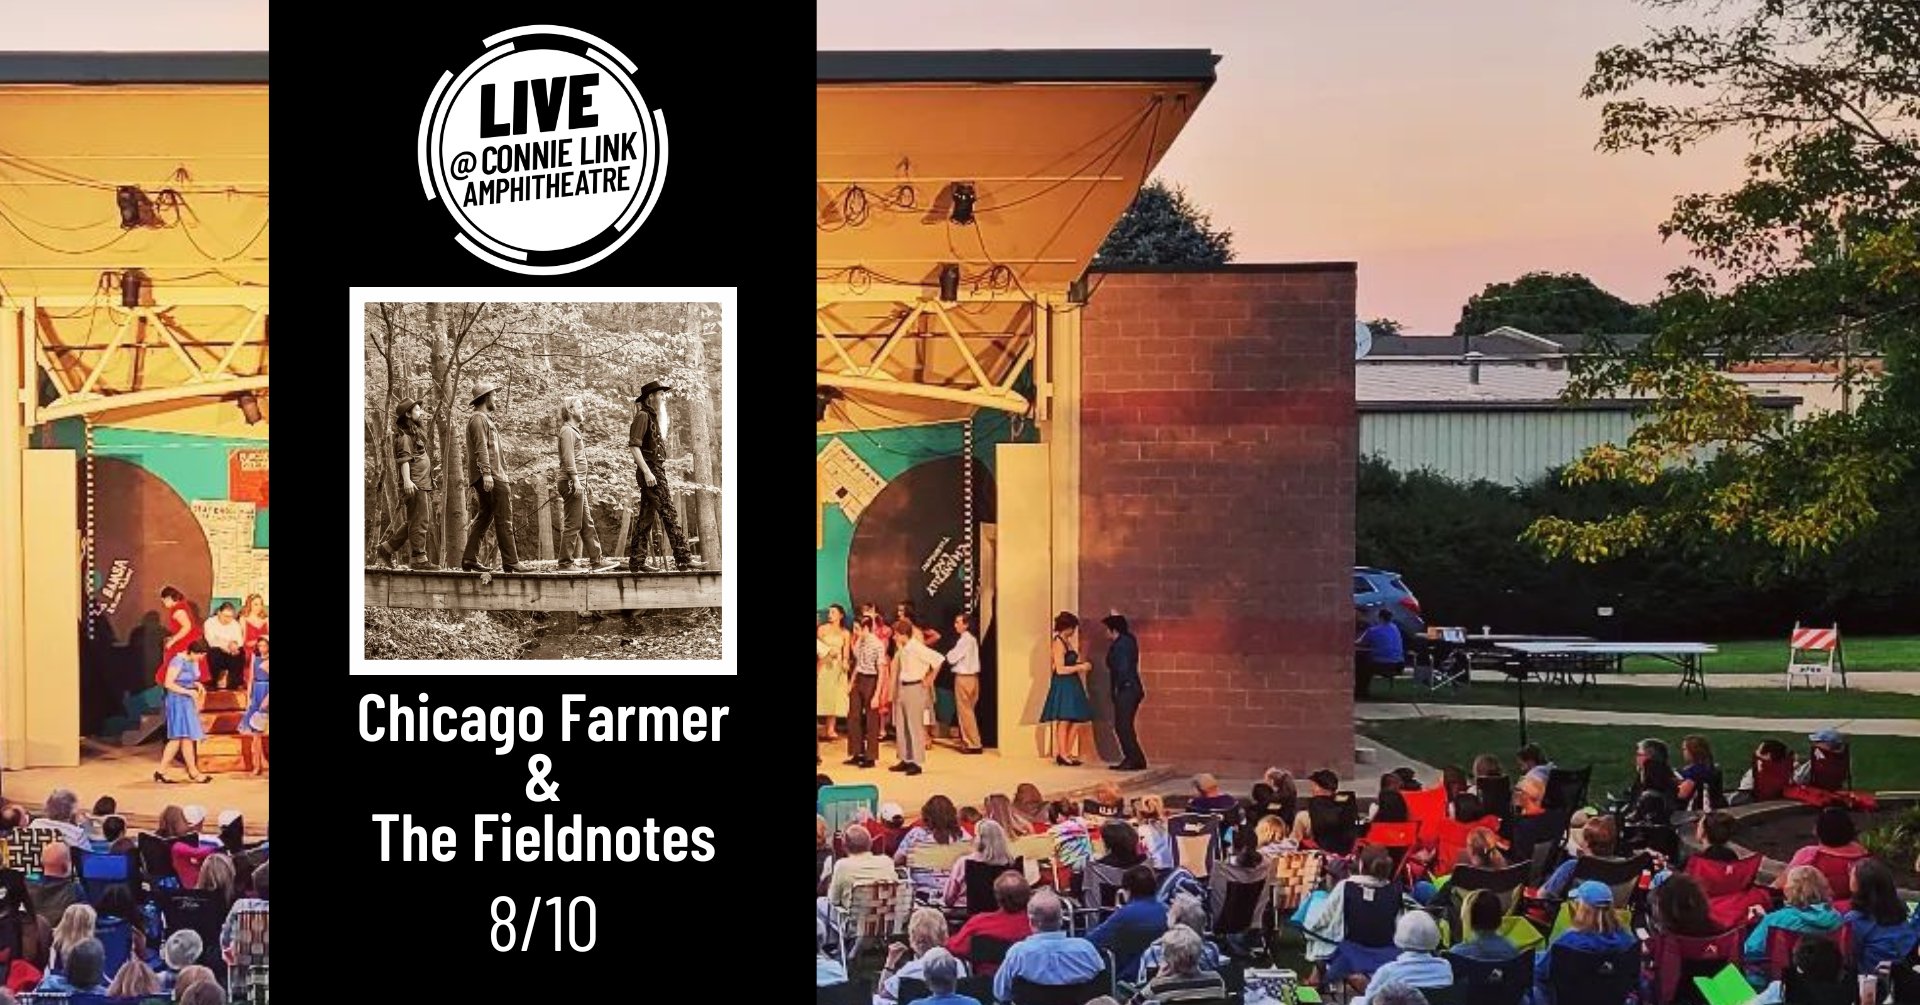 Normal LIVE presents Chicago Farmer & The Fieldnotes @ Connie Link Amphitheatre